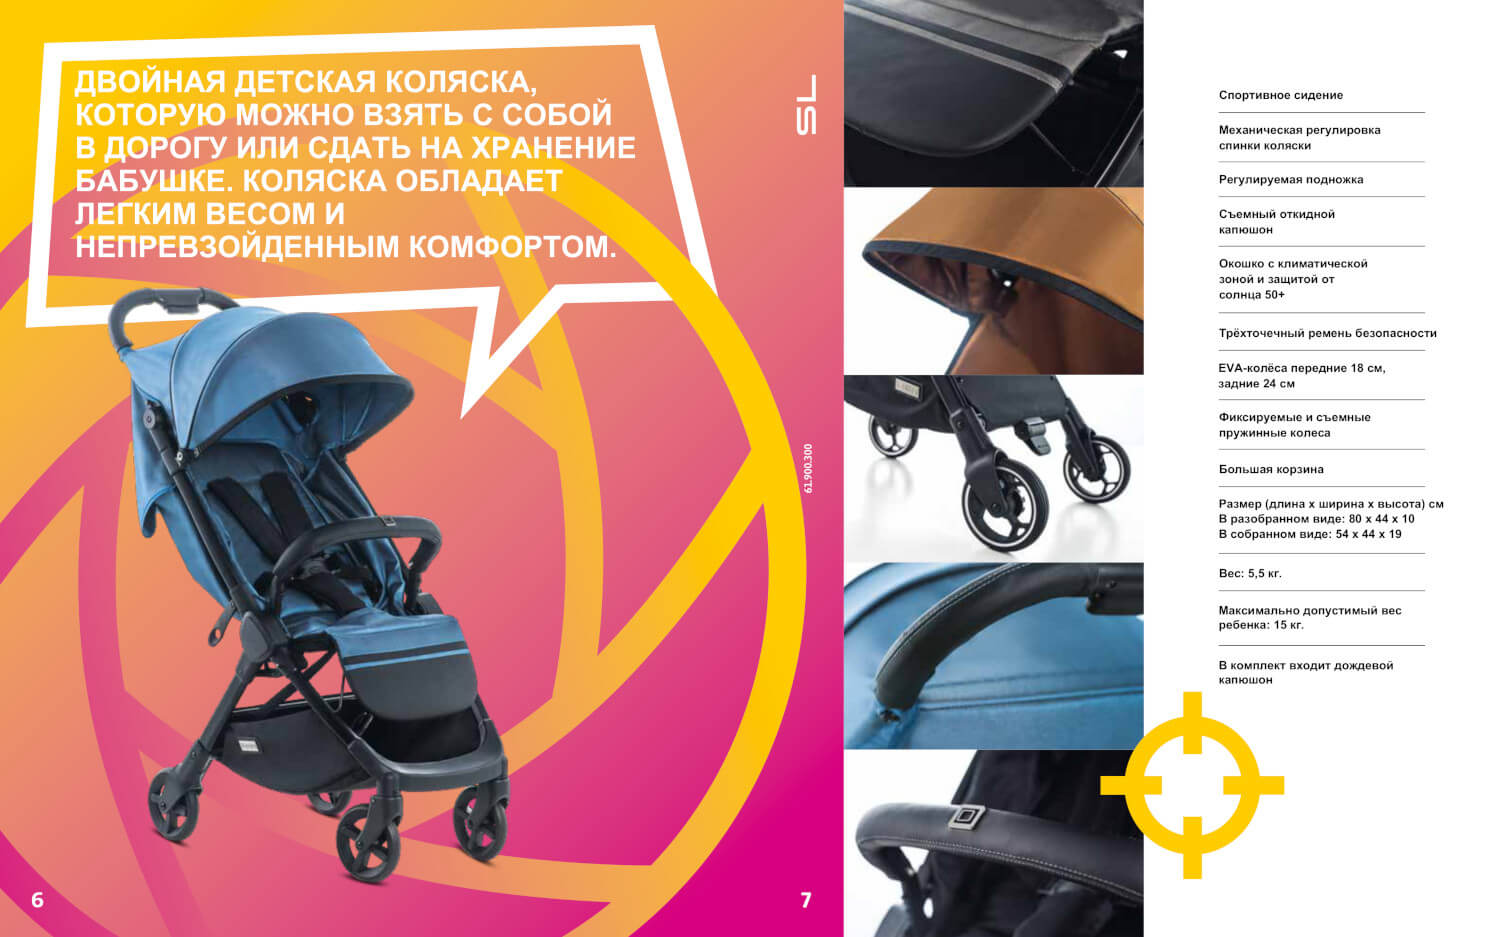 German product catalogue after being translated into russian (similar layout)